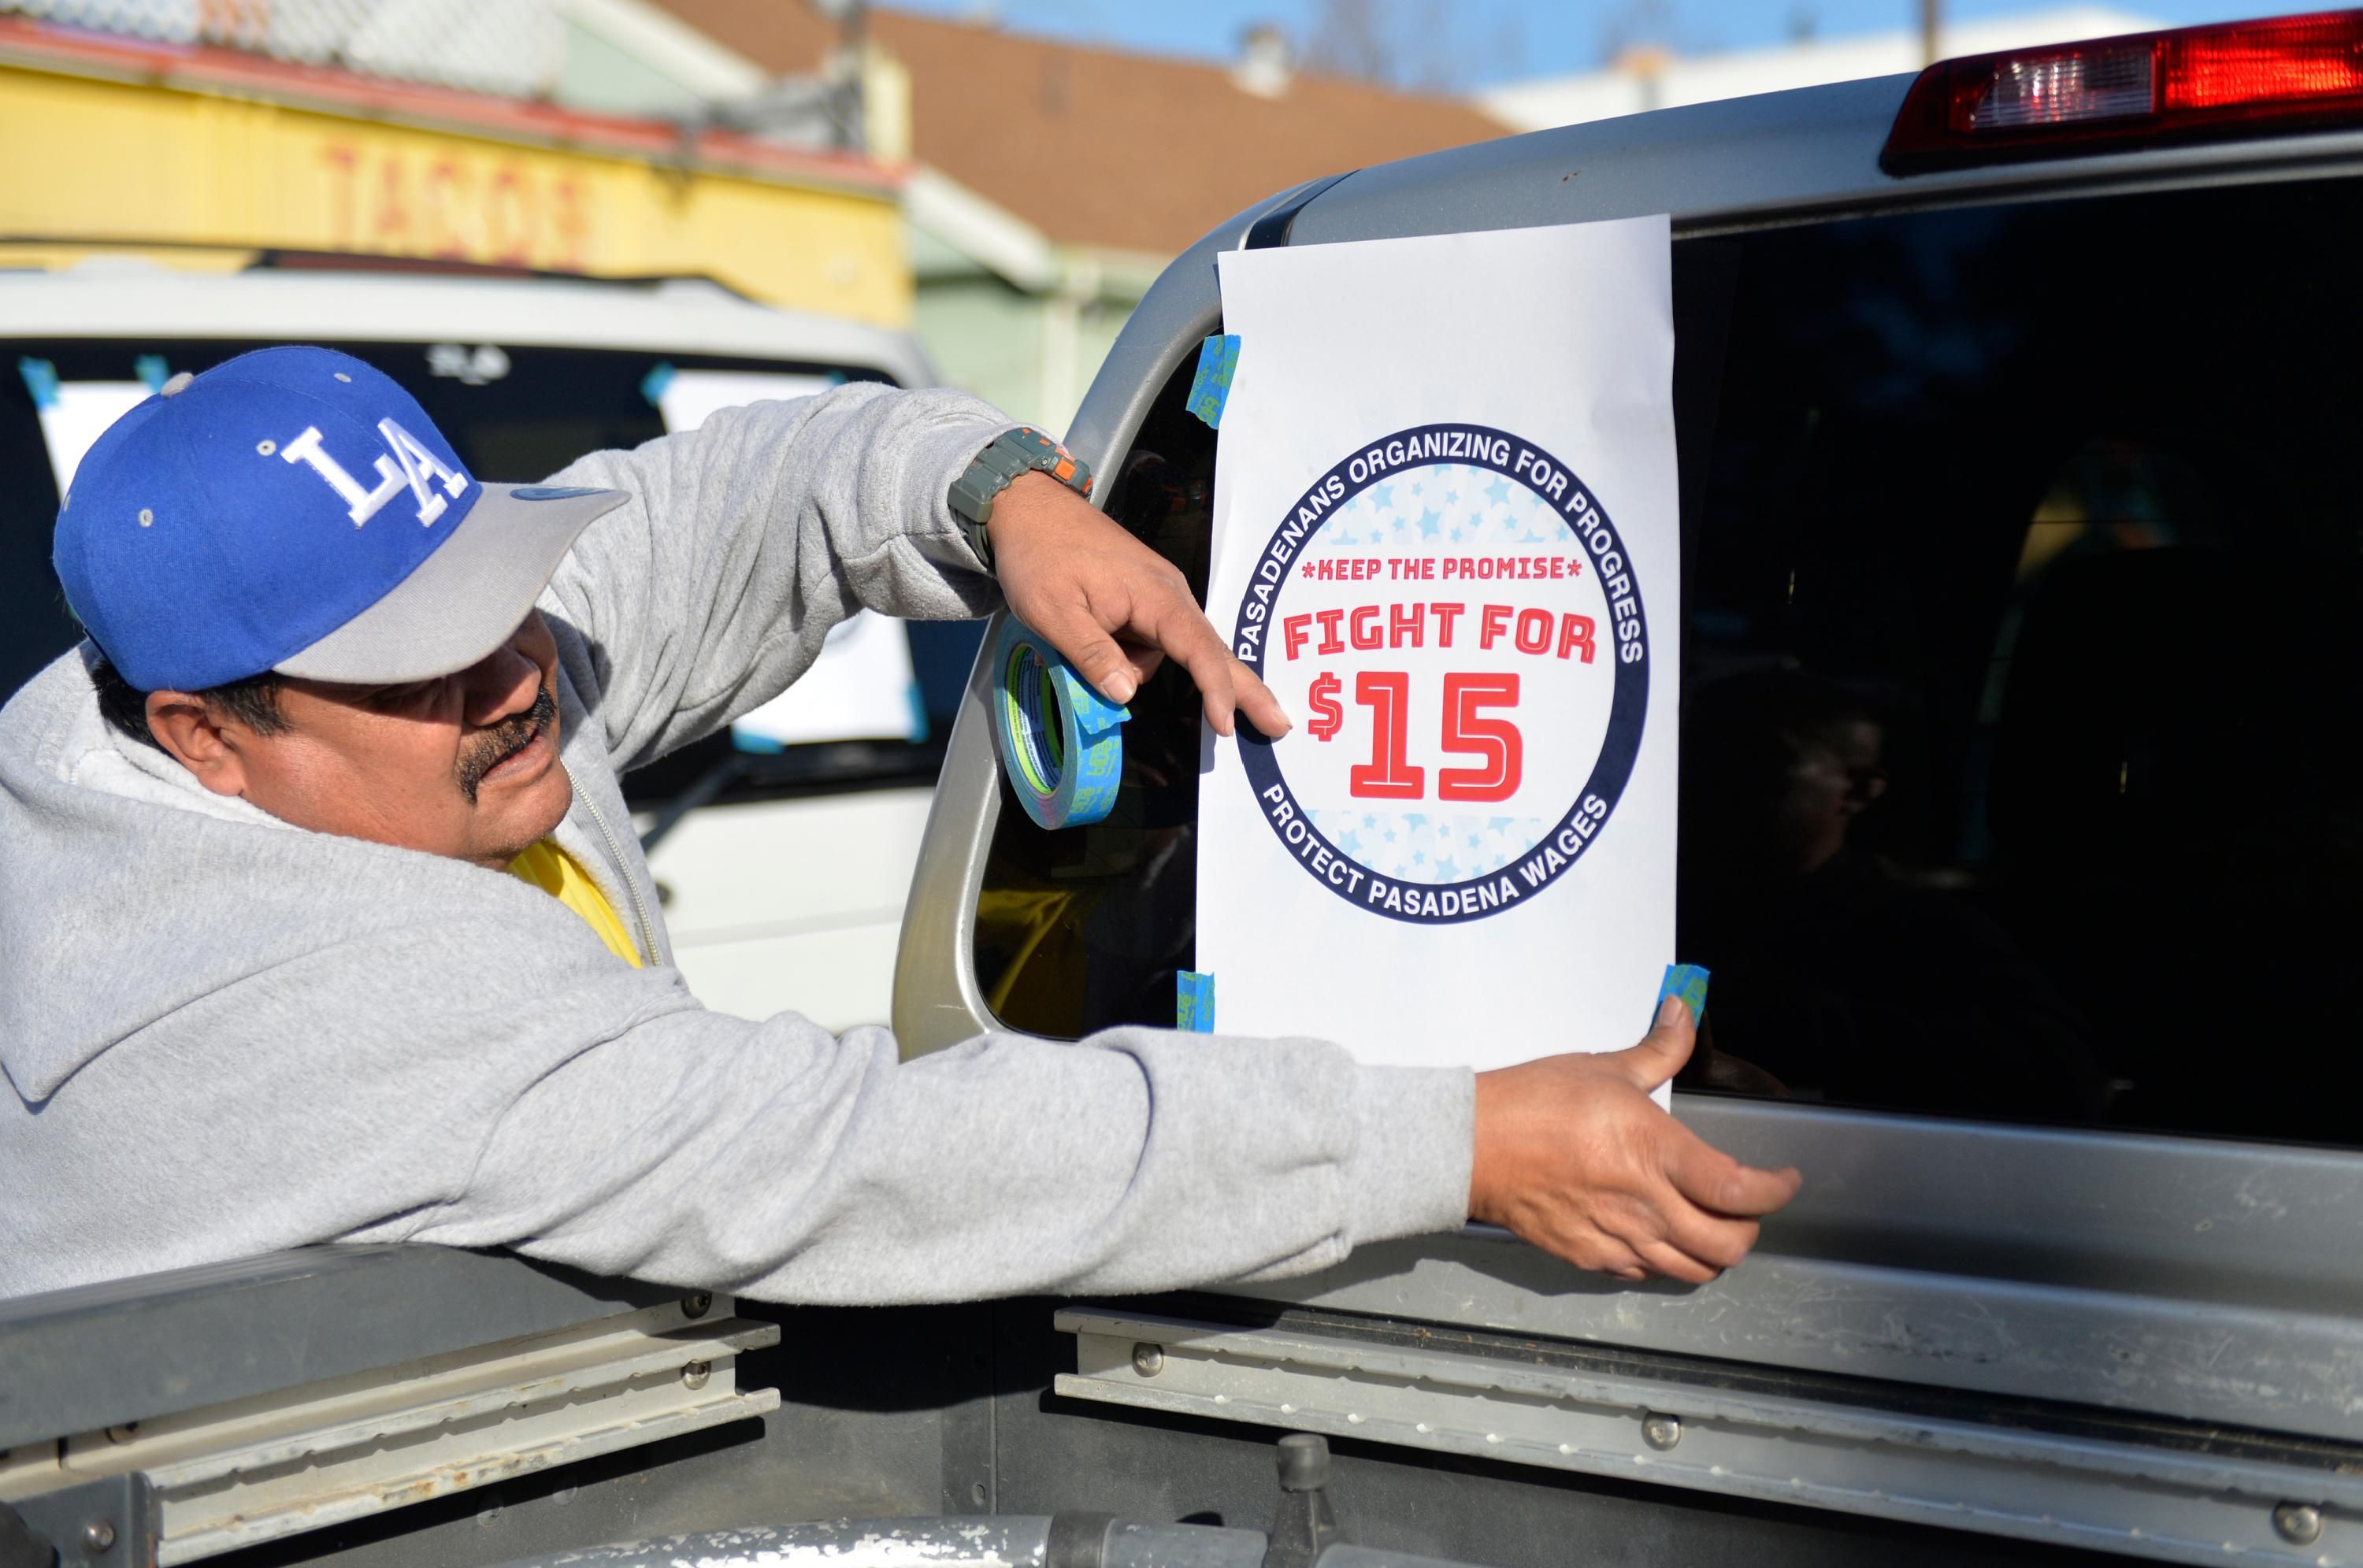 A demonstrator attaches a "Fight for $15" sign to his truck